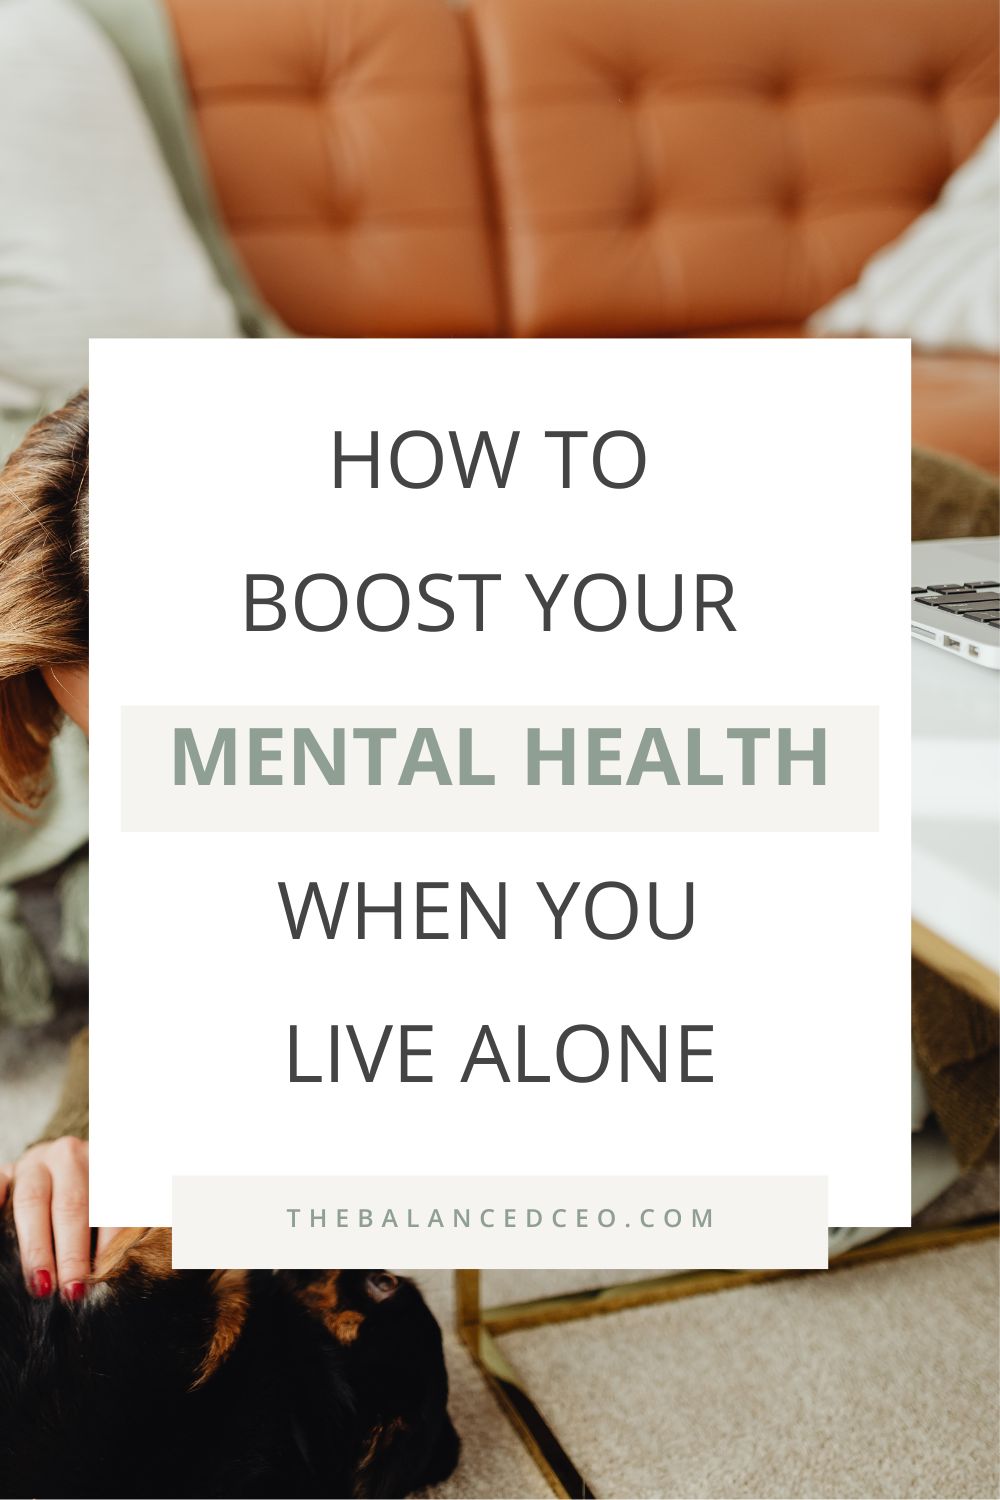 How to Boost Your Mental Health When You Live Alone